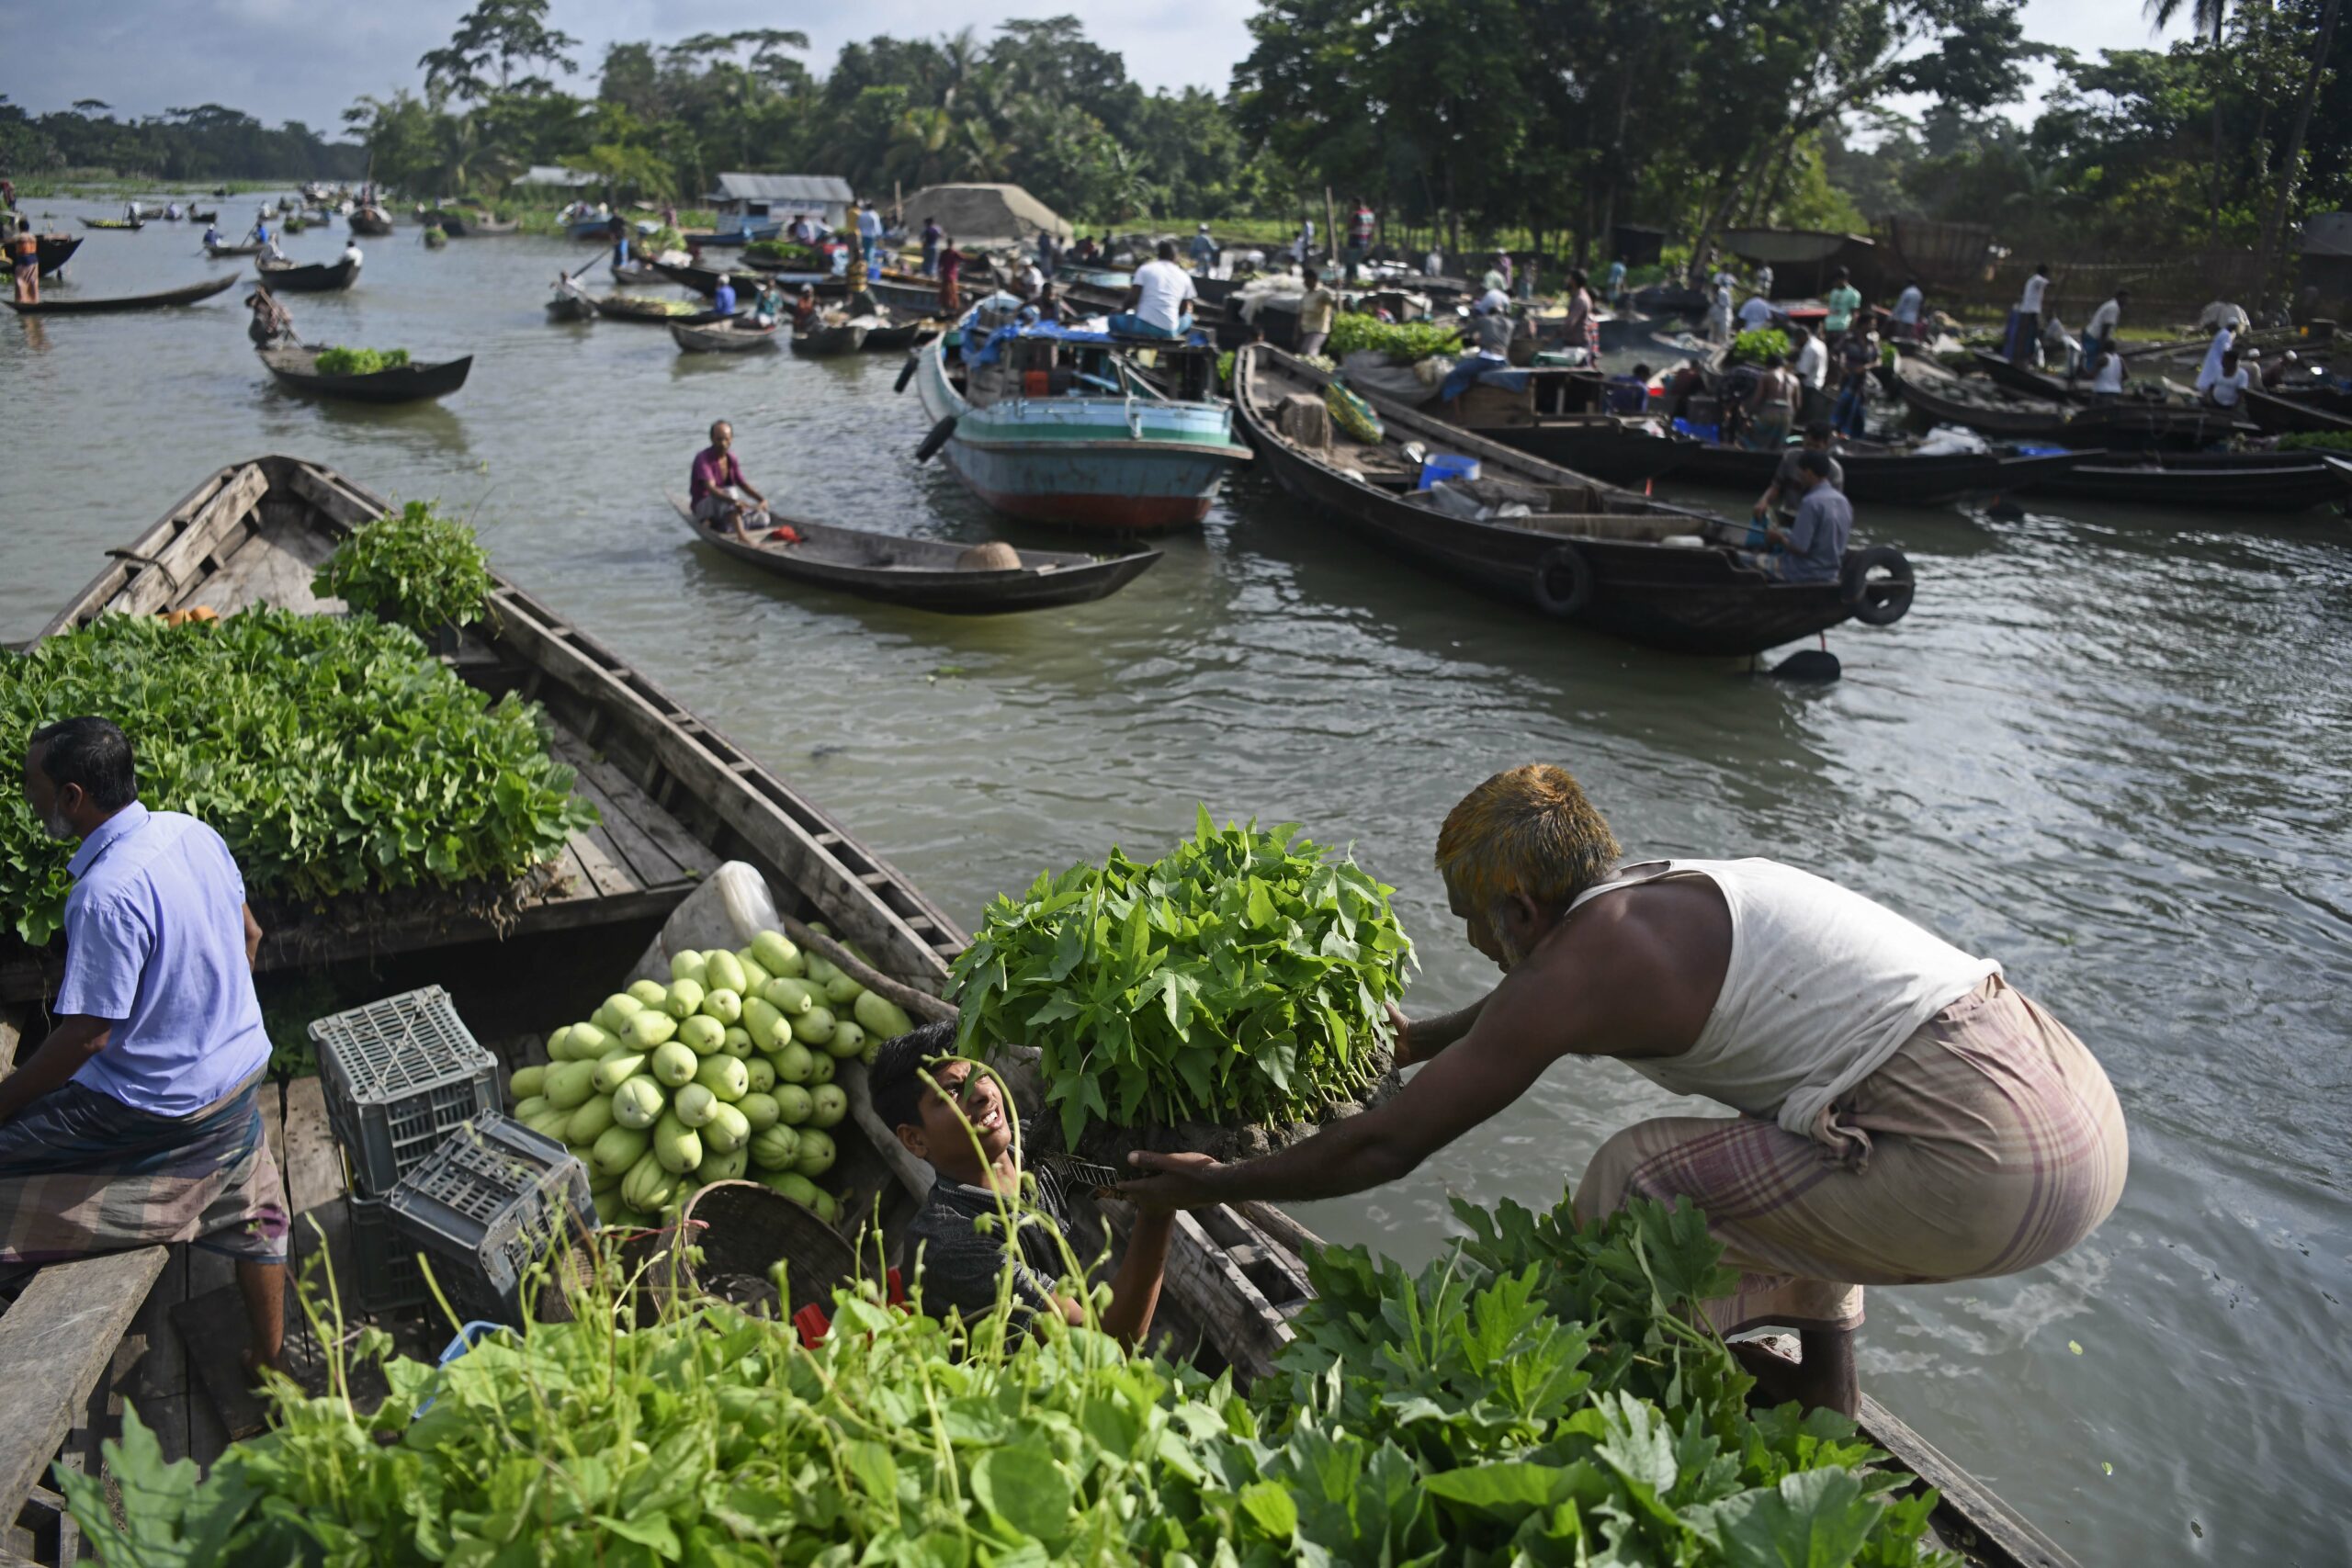 Farmers bring their fresh produce and seedlings to the biweekly floating market on the Belua River to sell to agents.